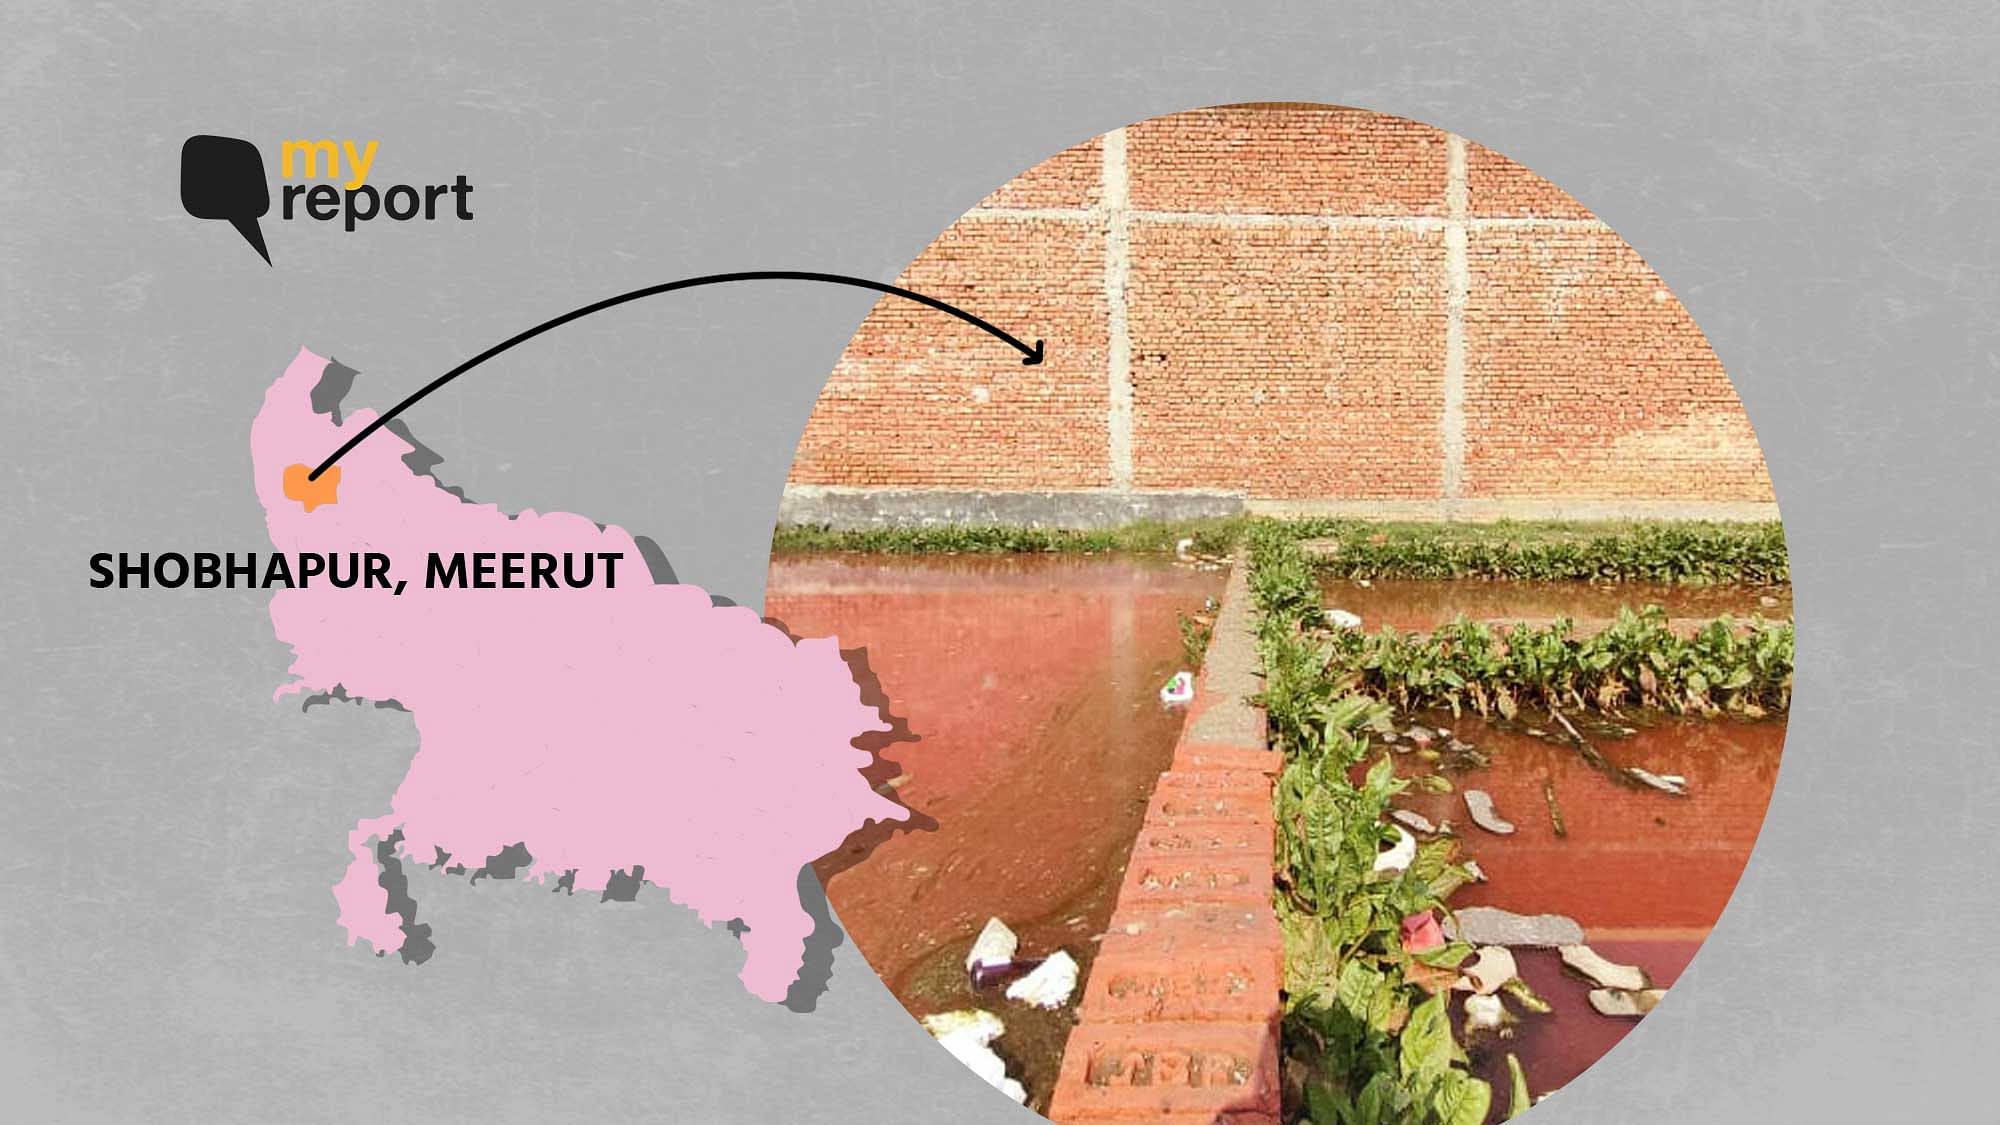 Water logging is caused not only due to lack of a nullah in the area, but several leather tanning units around.